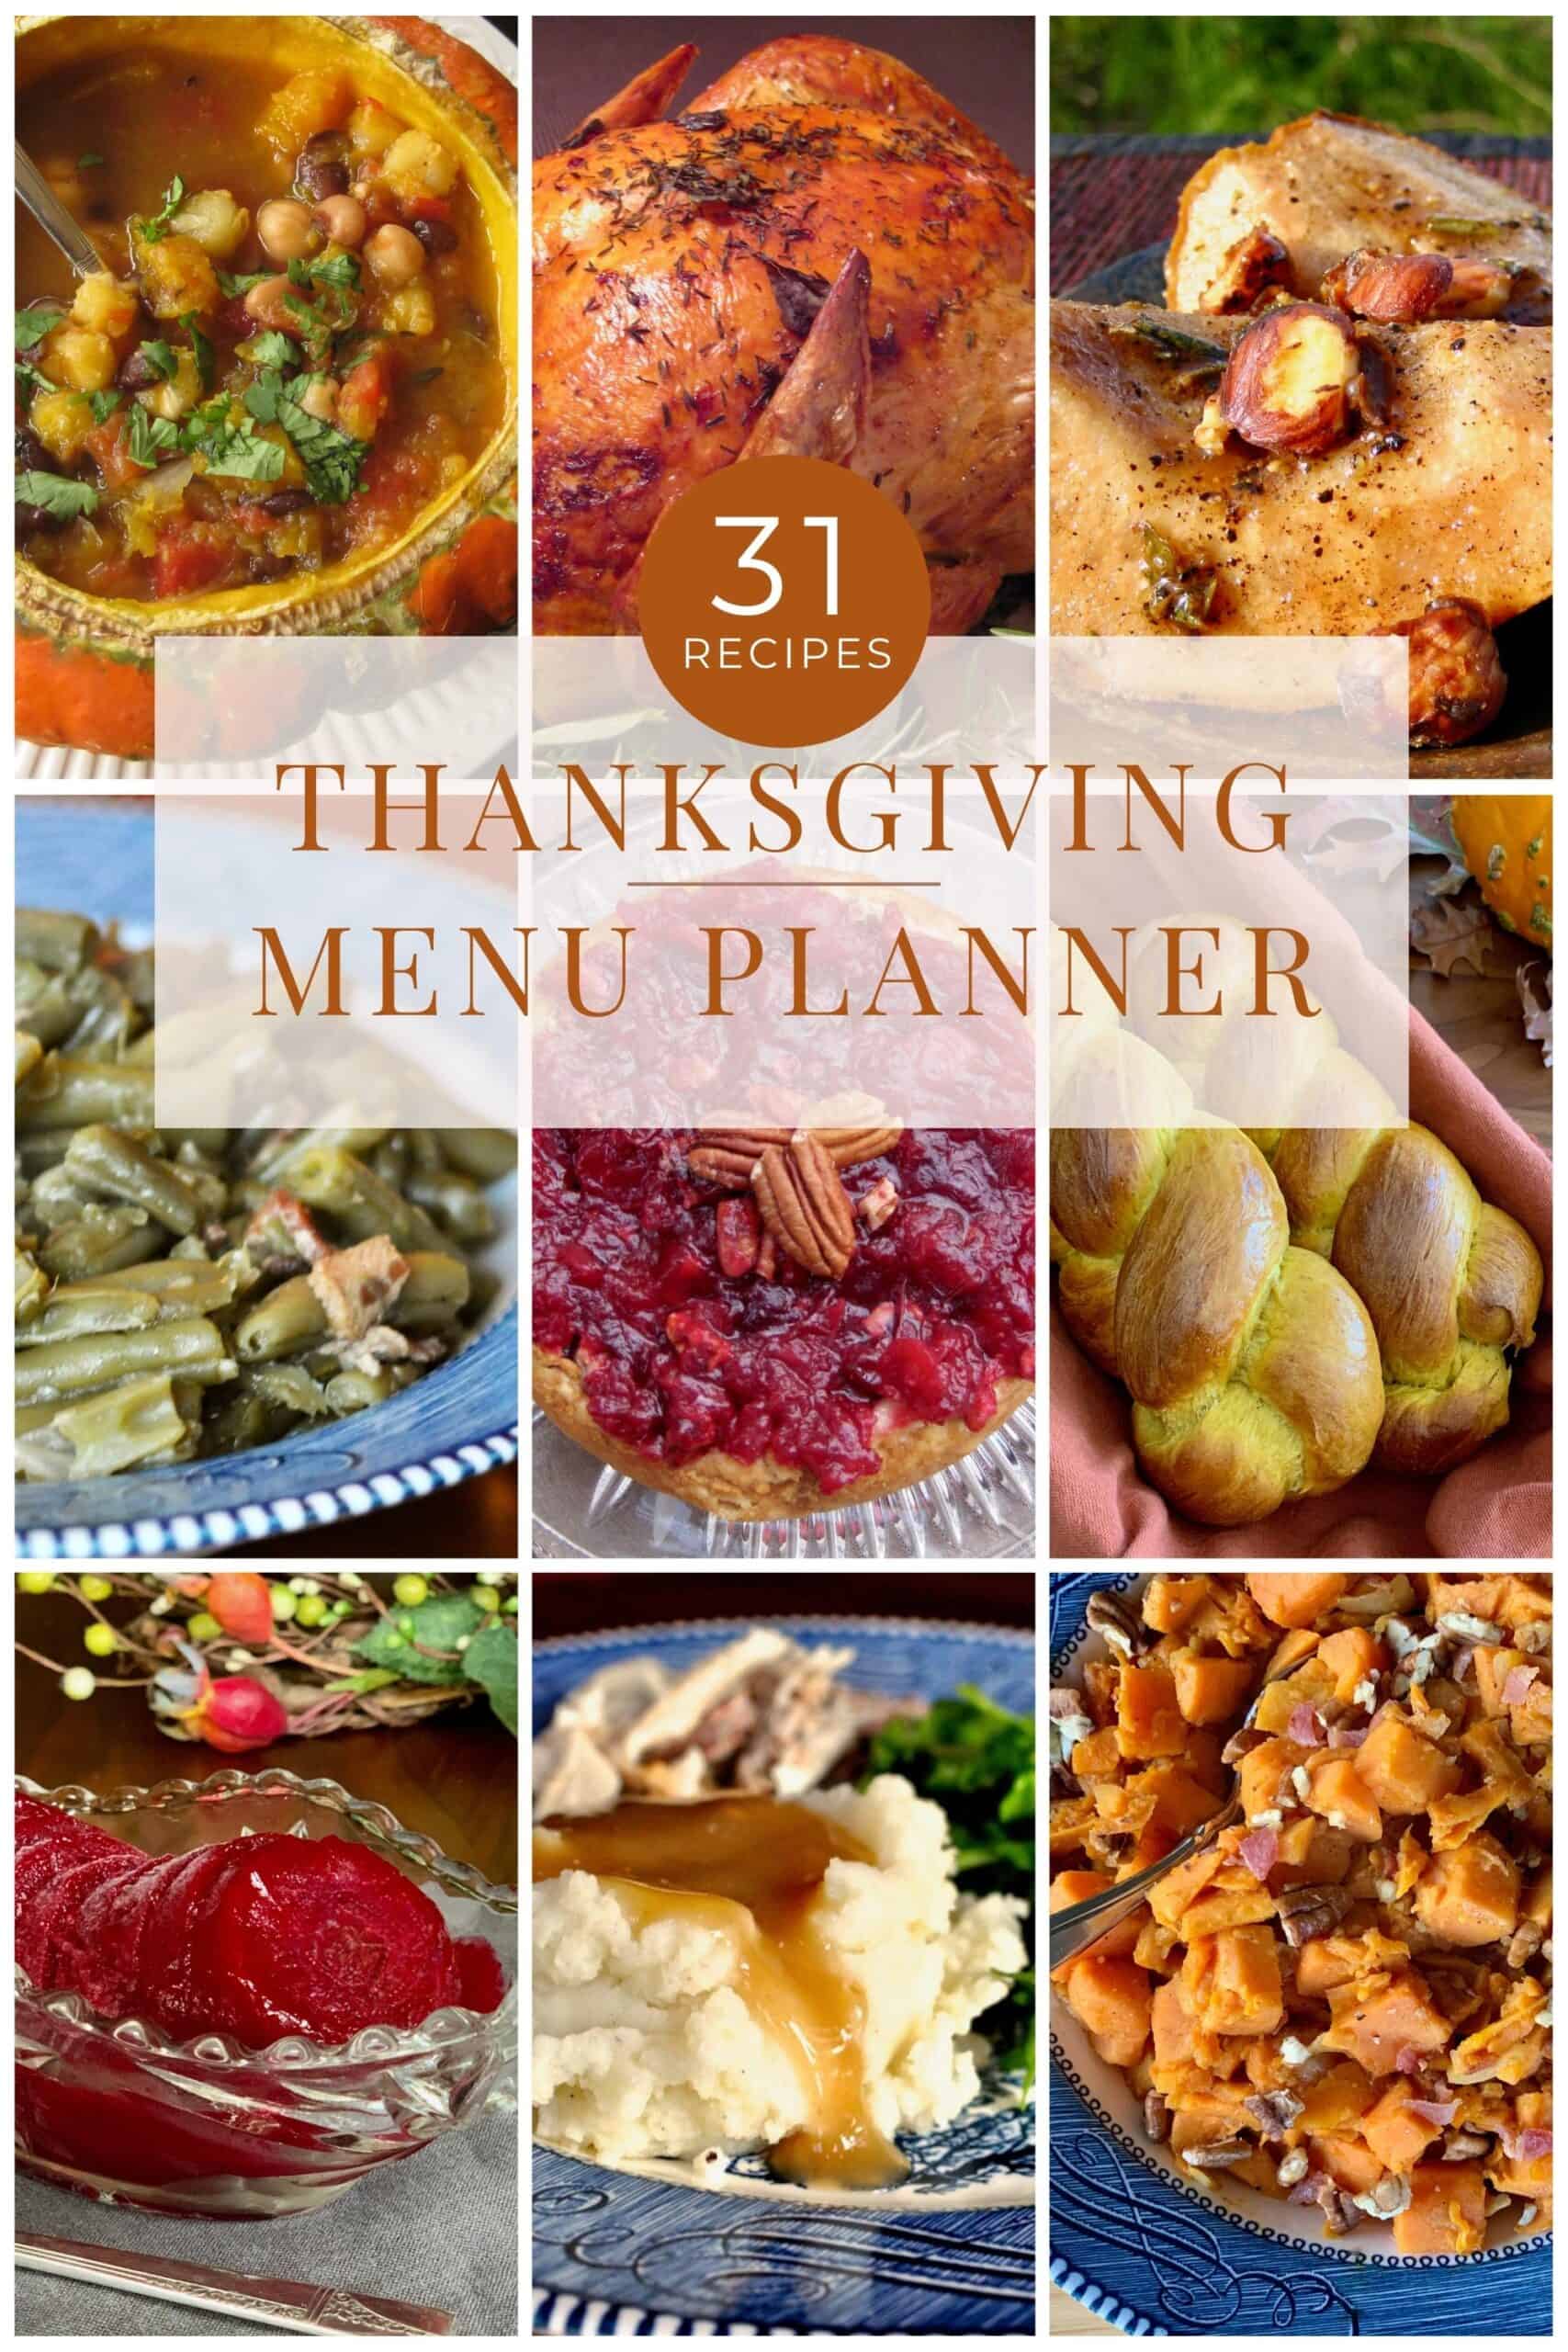 31 Recipes for Planning Your Thanksgiving Menu - My Own Sweet Thyme